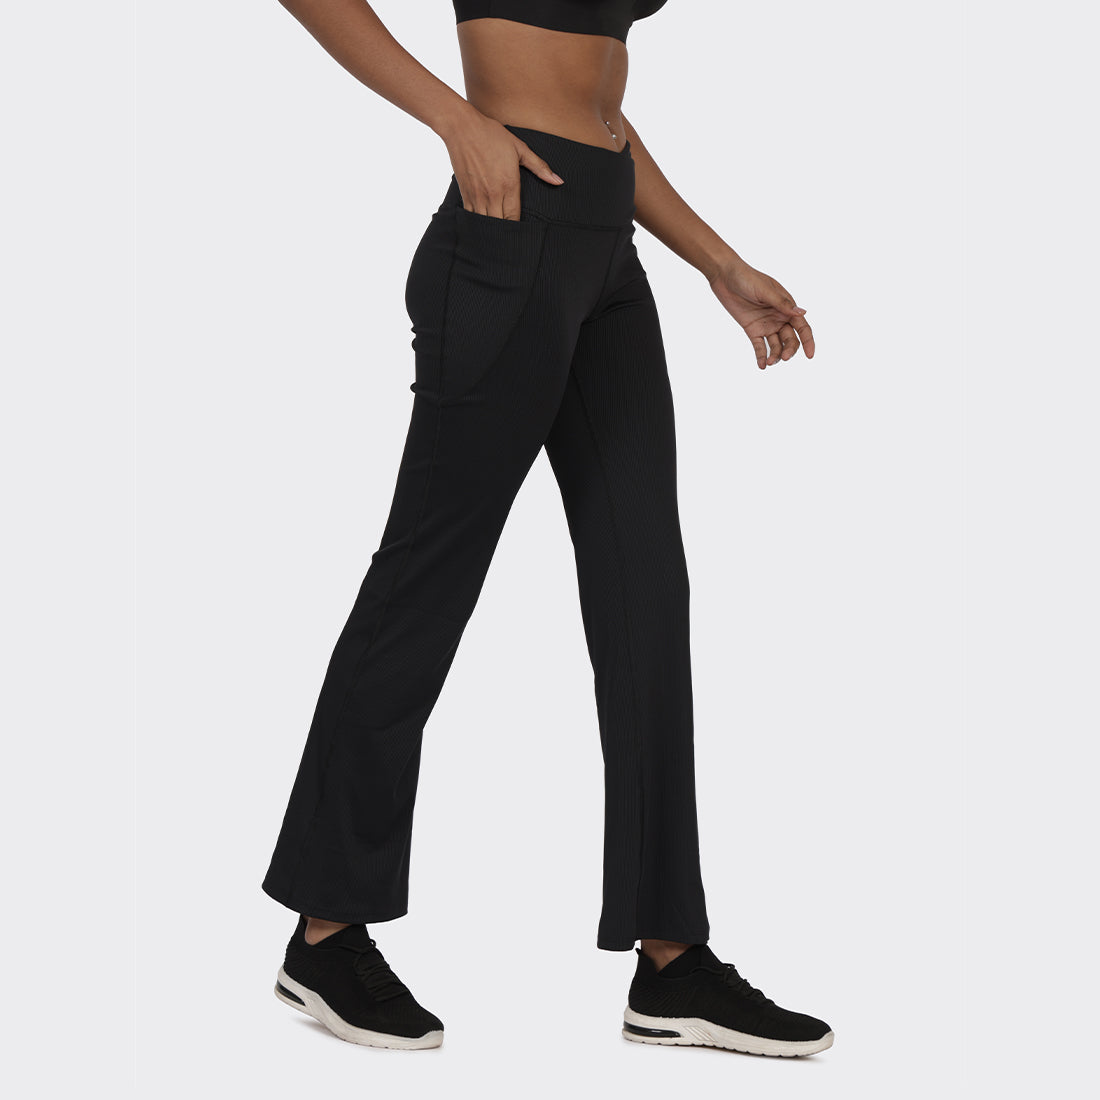 Overlap Ribbed Yoga Flare Pants with 2 Pockets